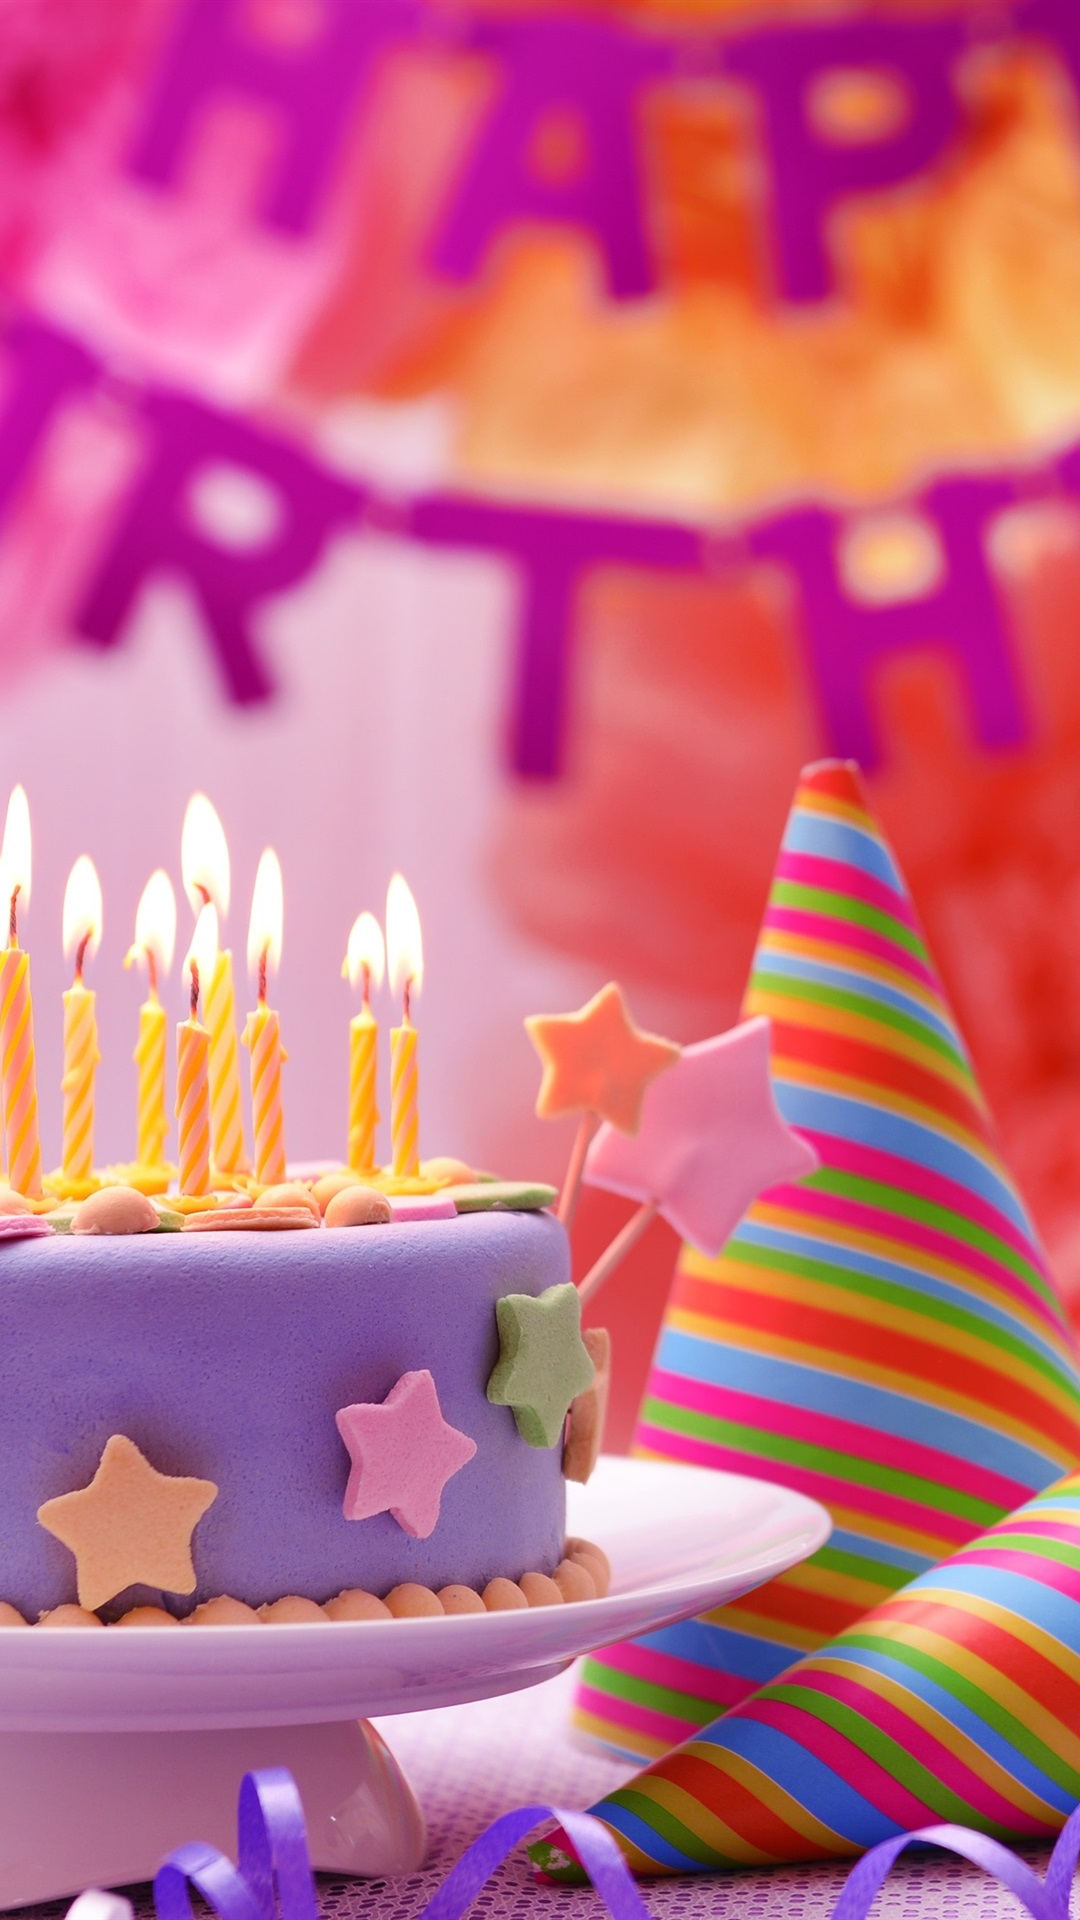 Iphone Wallpaper Happy Birthday, Cake, Colorful Decoration, - Bright Cake Background - HD Wallpaper 